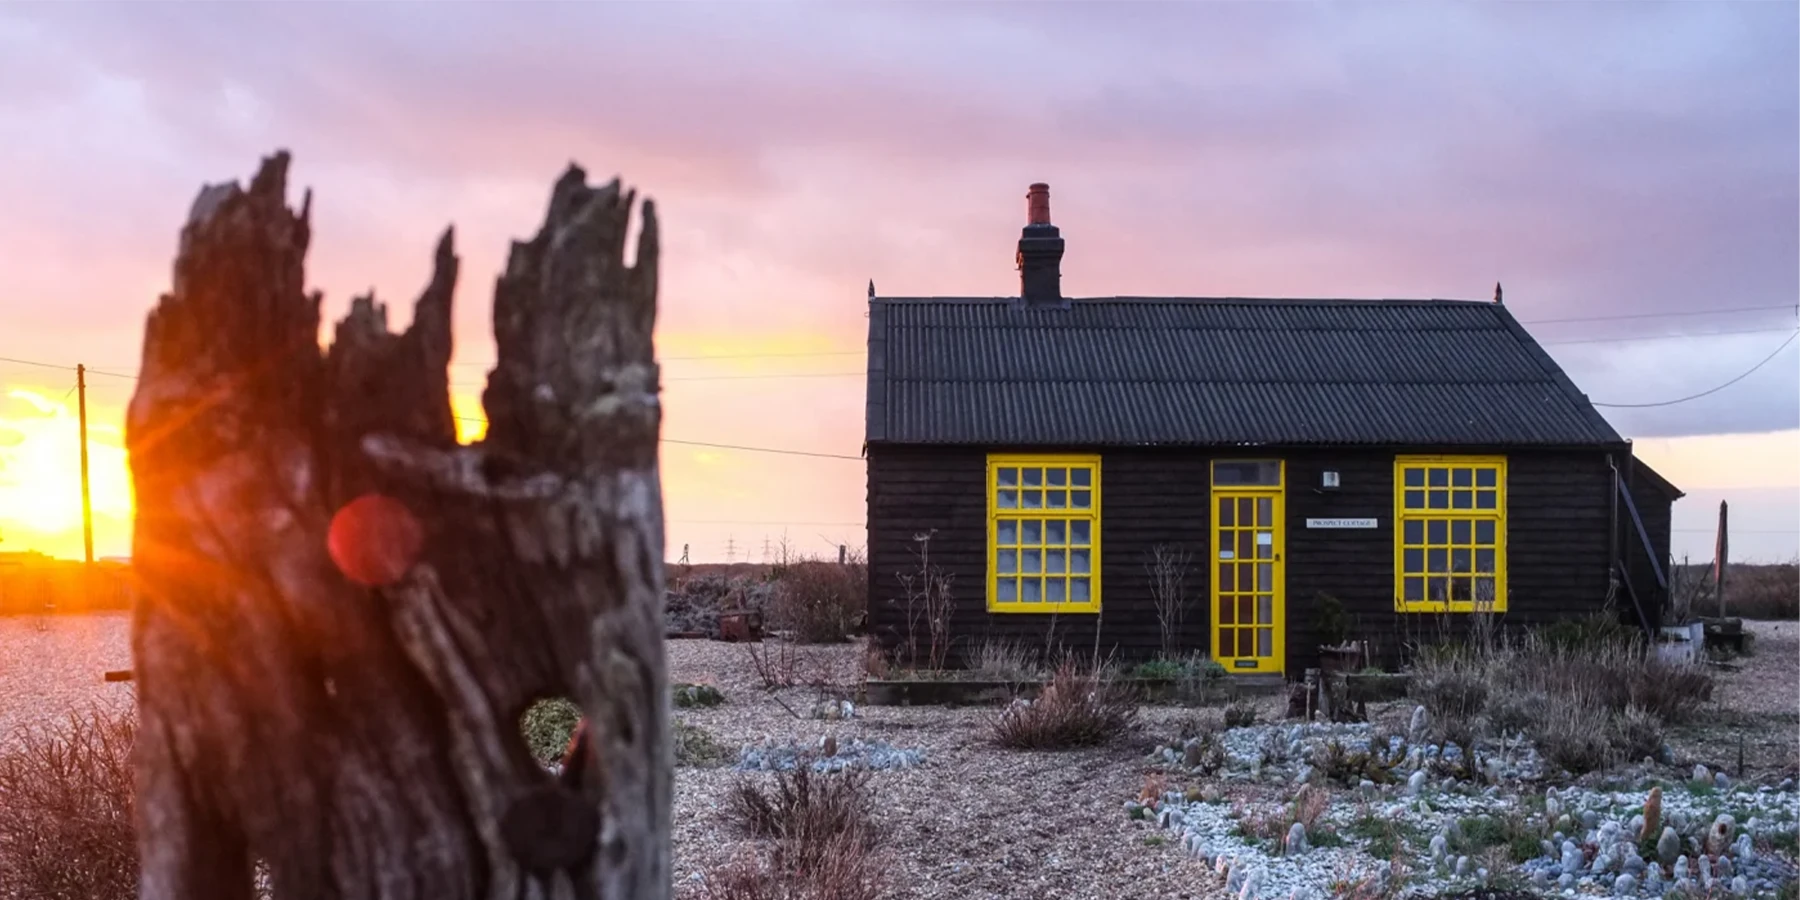 JAM on the Marsh offers a tour to Prospect Cottage, the former home of iconic gay-rights activist and filmmaker Derek Jarman.